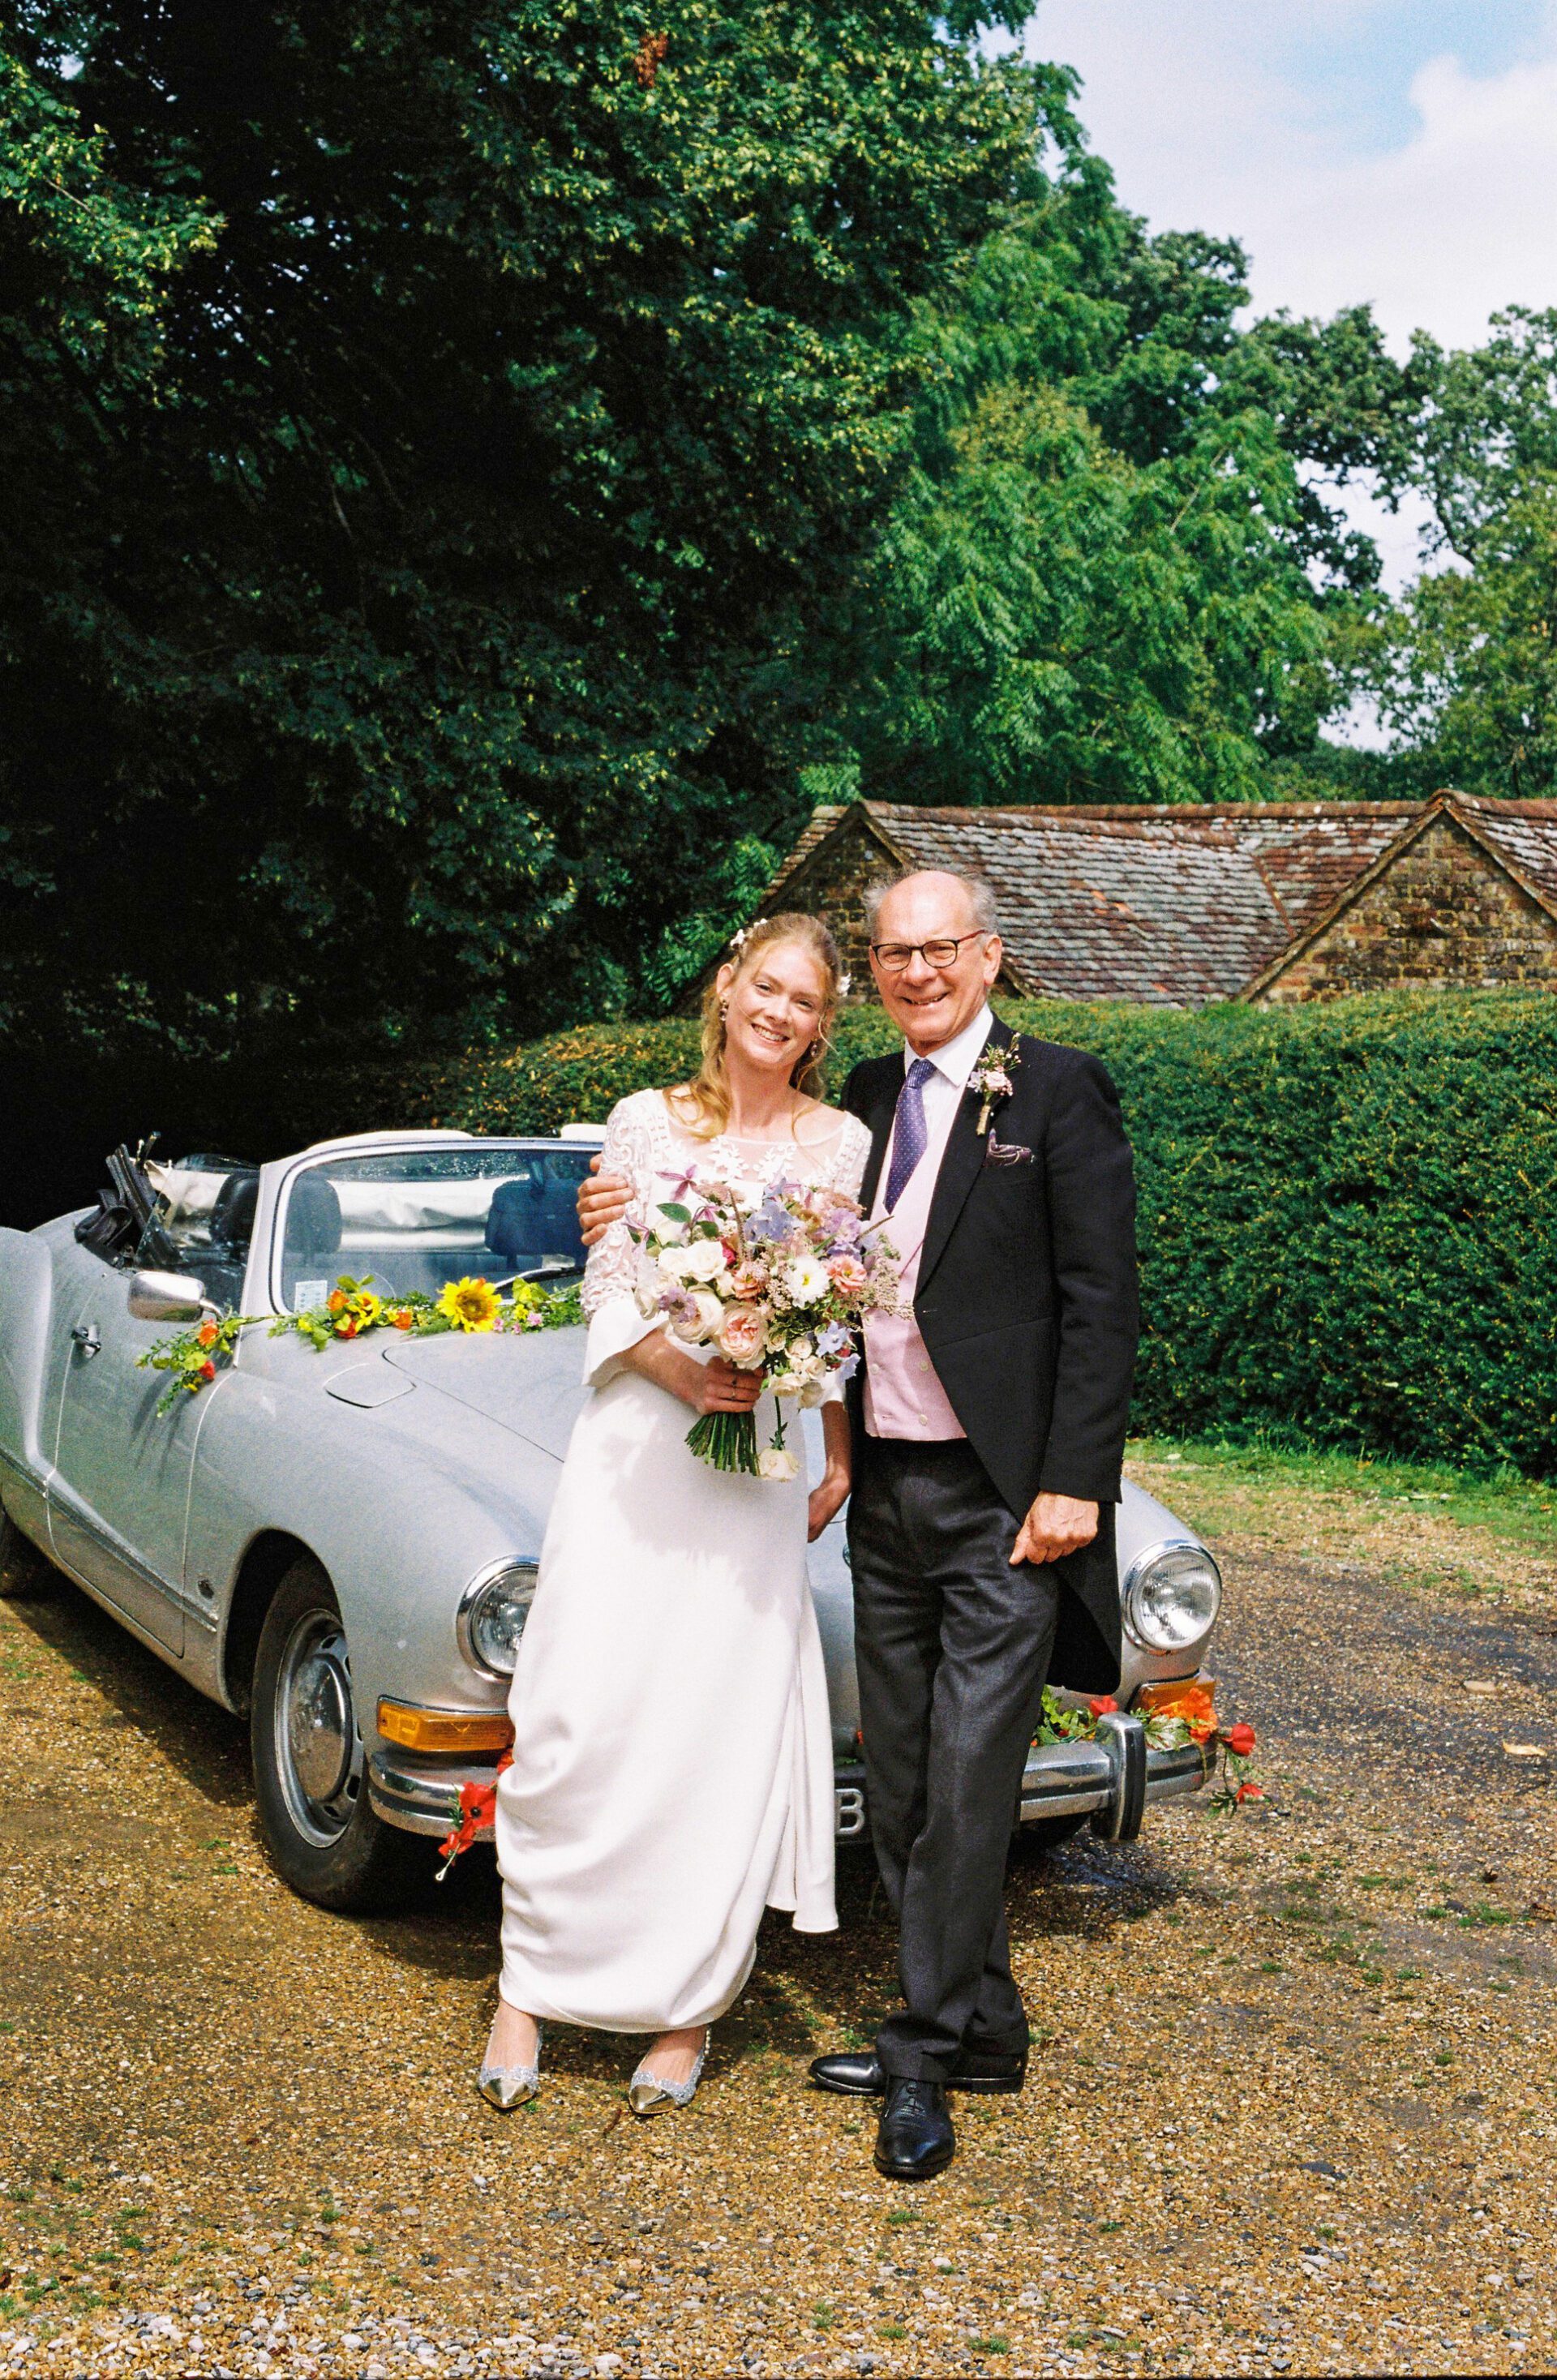 35mm portrait of the bride and her father before driving to Brickwall House, Kent wedding venue